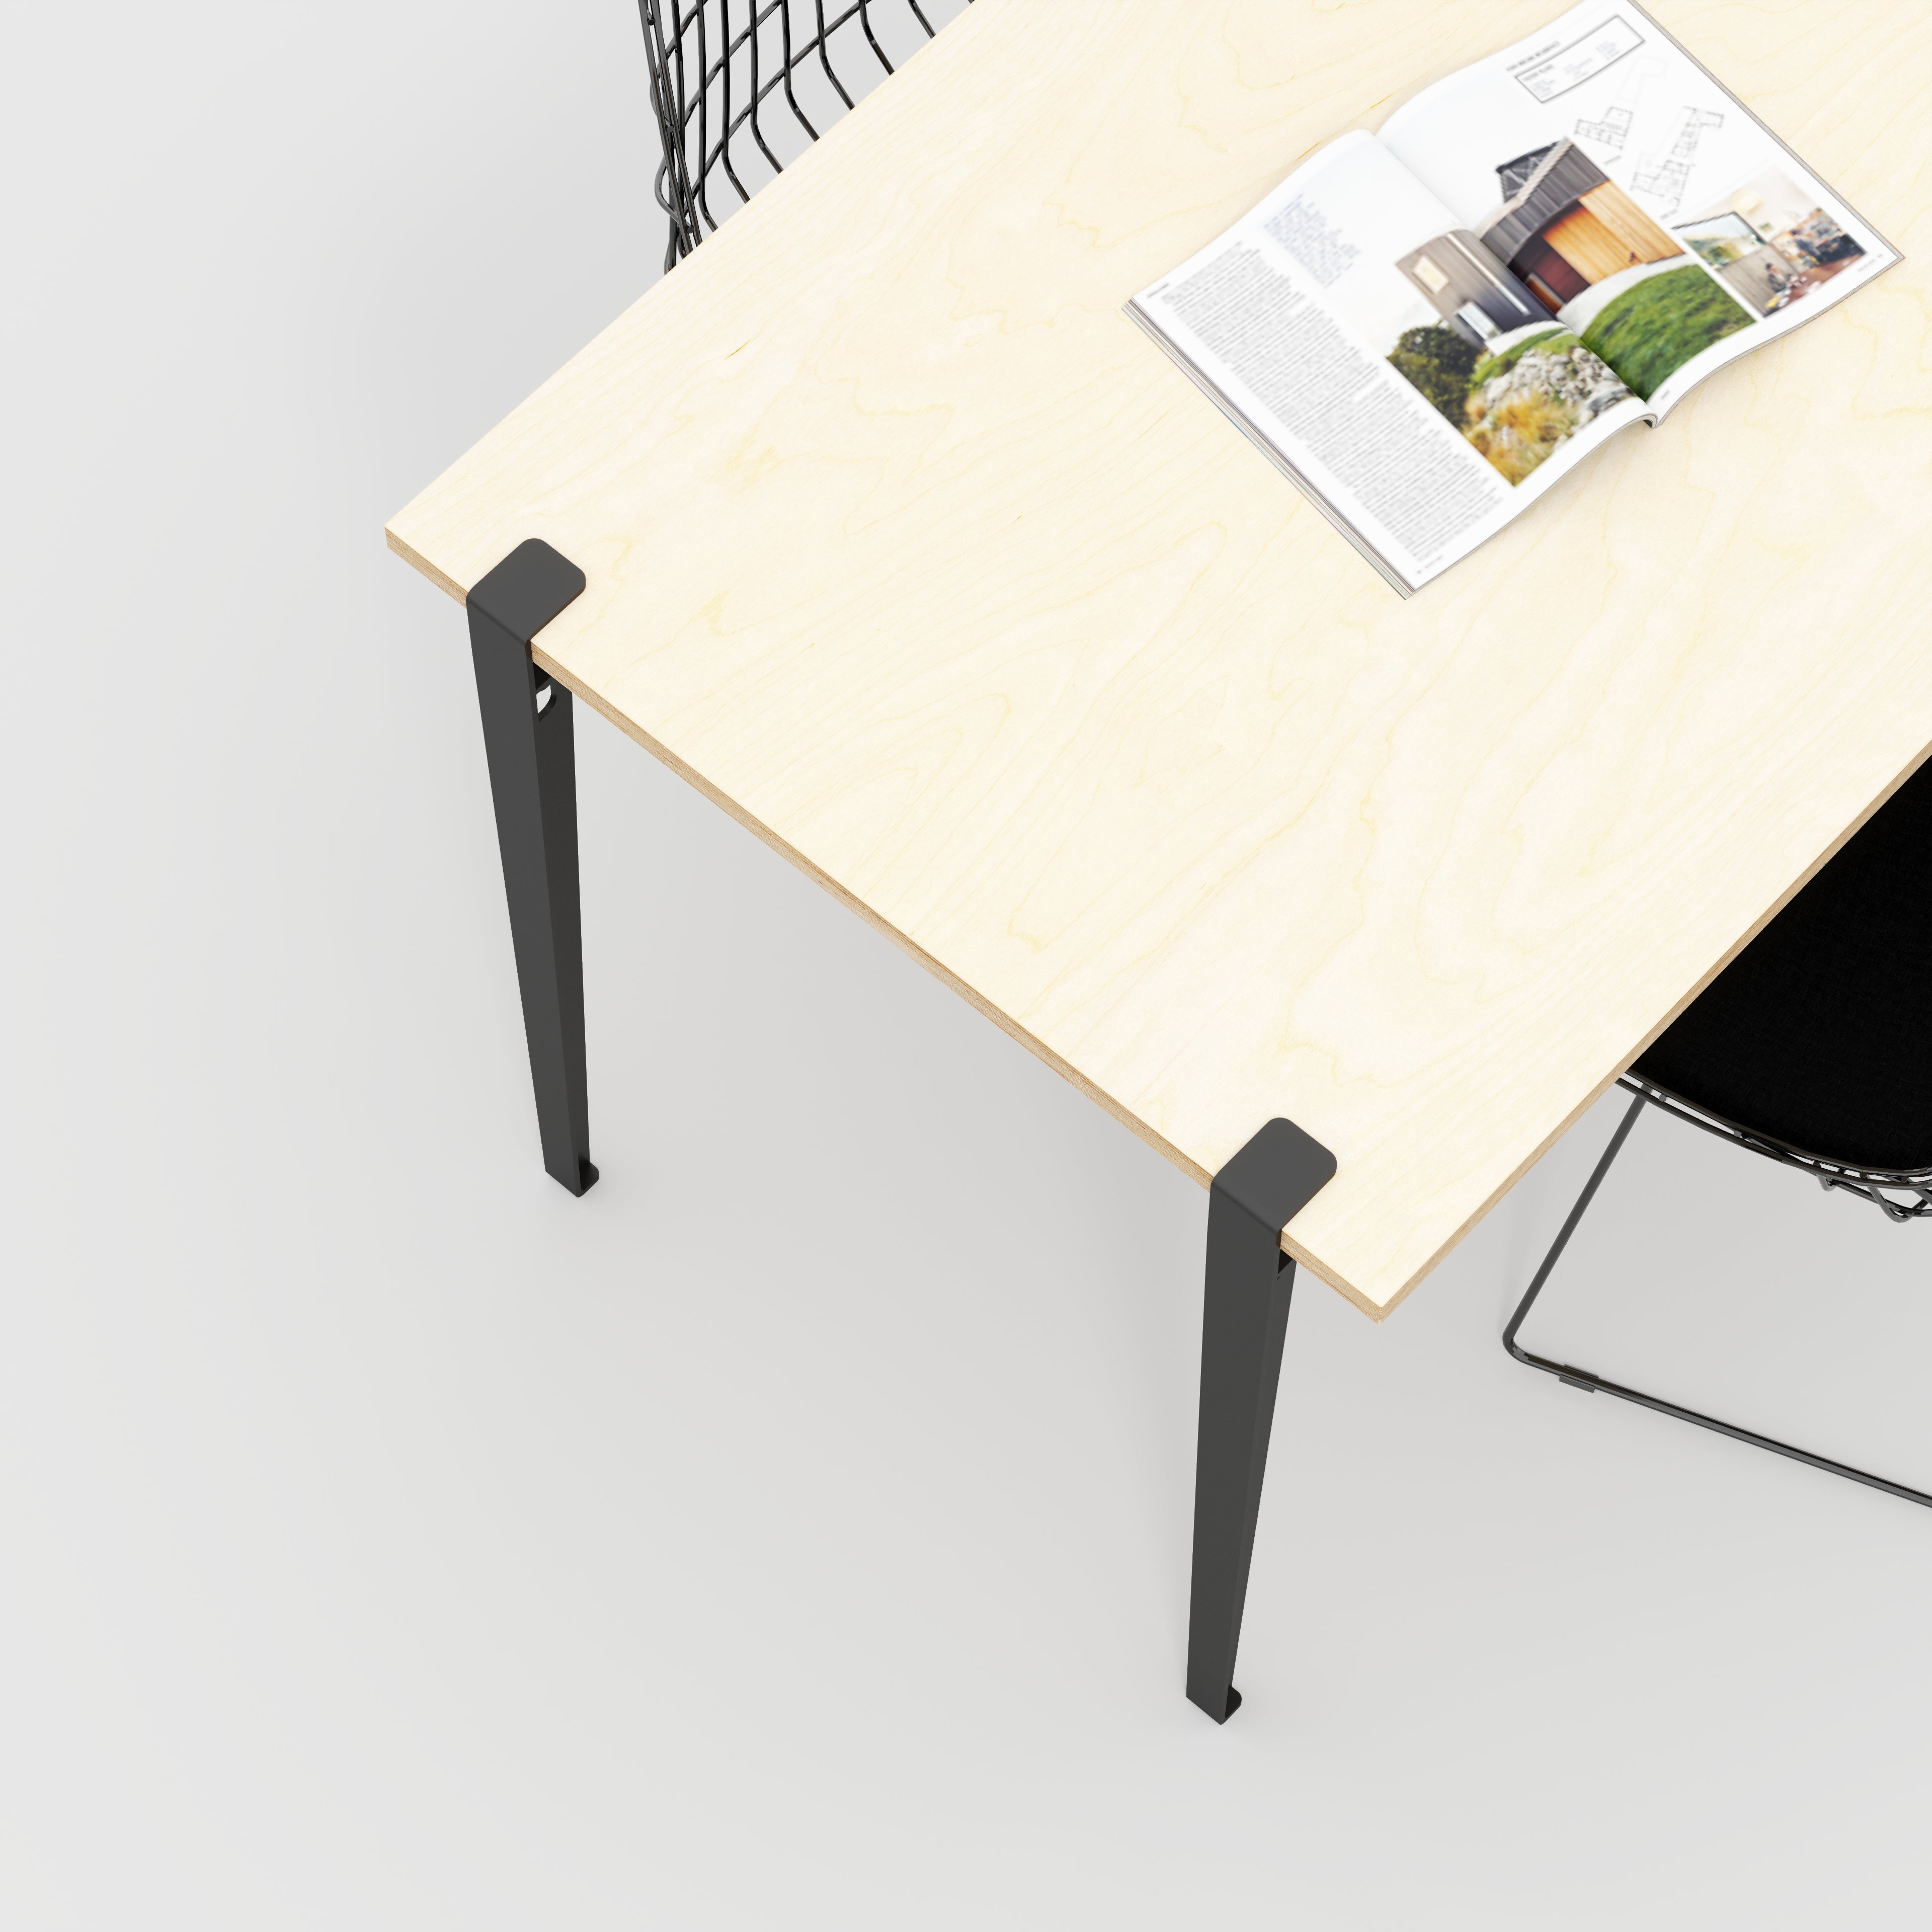 Wall Table with Black Tiptoe Legs and Brackets - Plywood Birch - 1200(w) x 800(d) x 750(h)